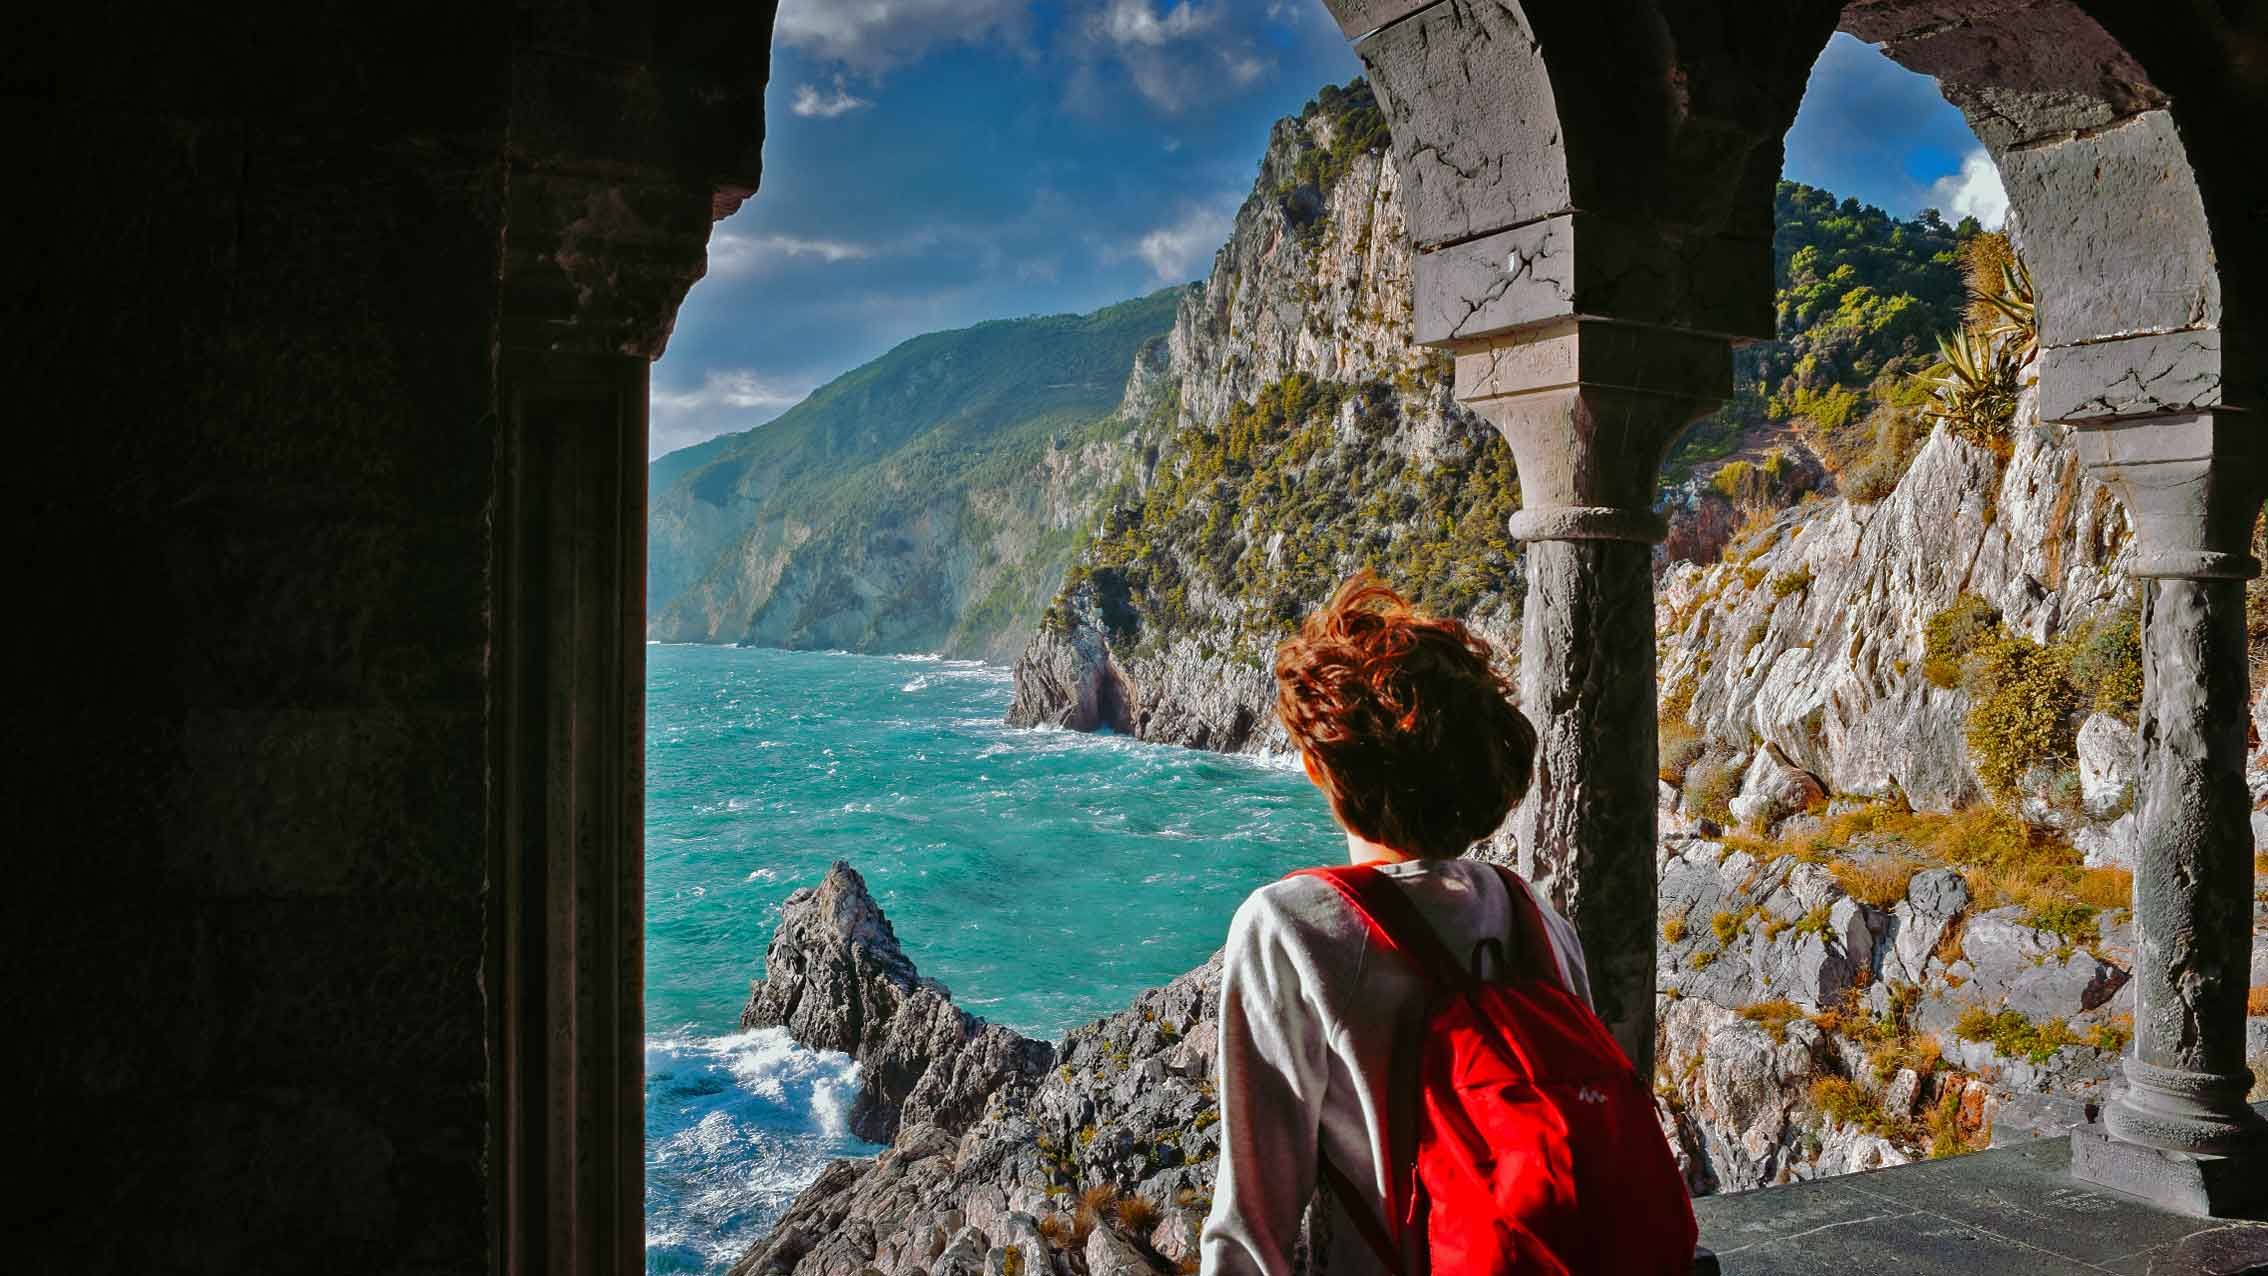 looking at the beauty of Mediterranean sea at Cinque Terre